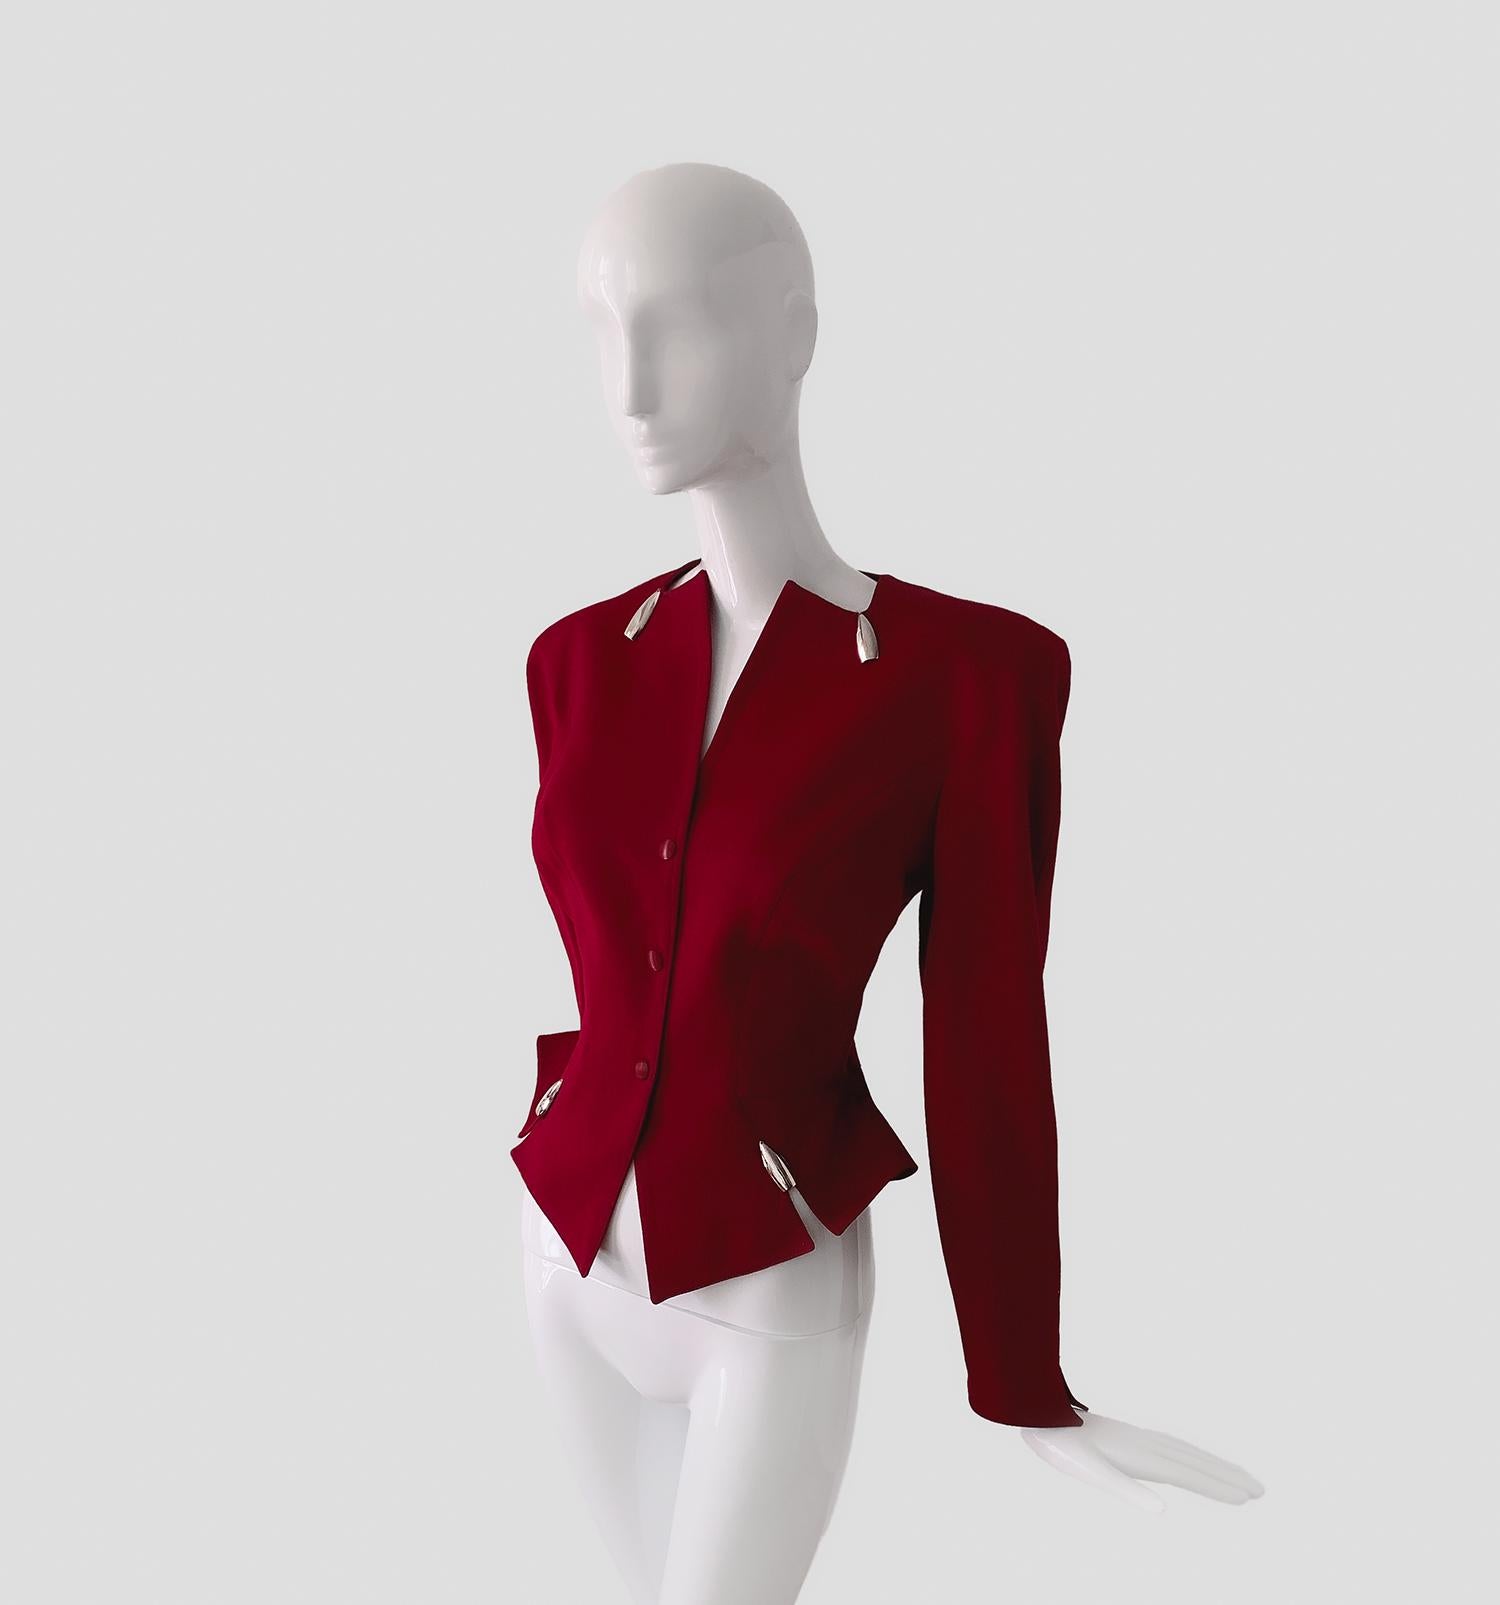 Stunning red Thierry Mugler blazer jacket with amazing silver bulllet details. Hiver Buick collection FW 1989.
Adorned with chrome ornaments inspired by the 1959 Cadillac Eldorado. Very rare Thierry Mugler creation. Avant-garde & drama. Dark